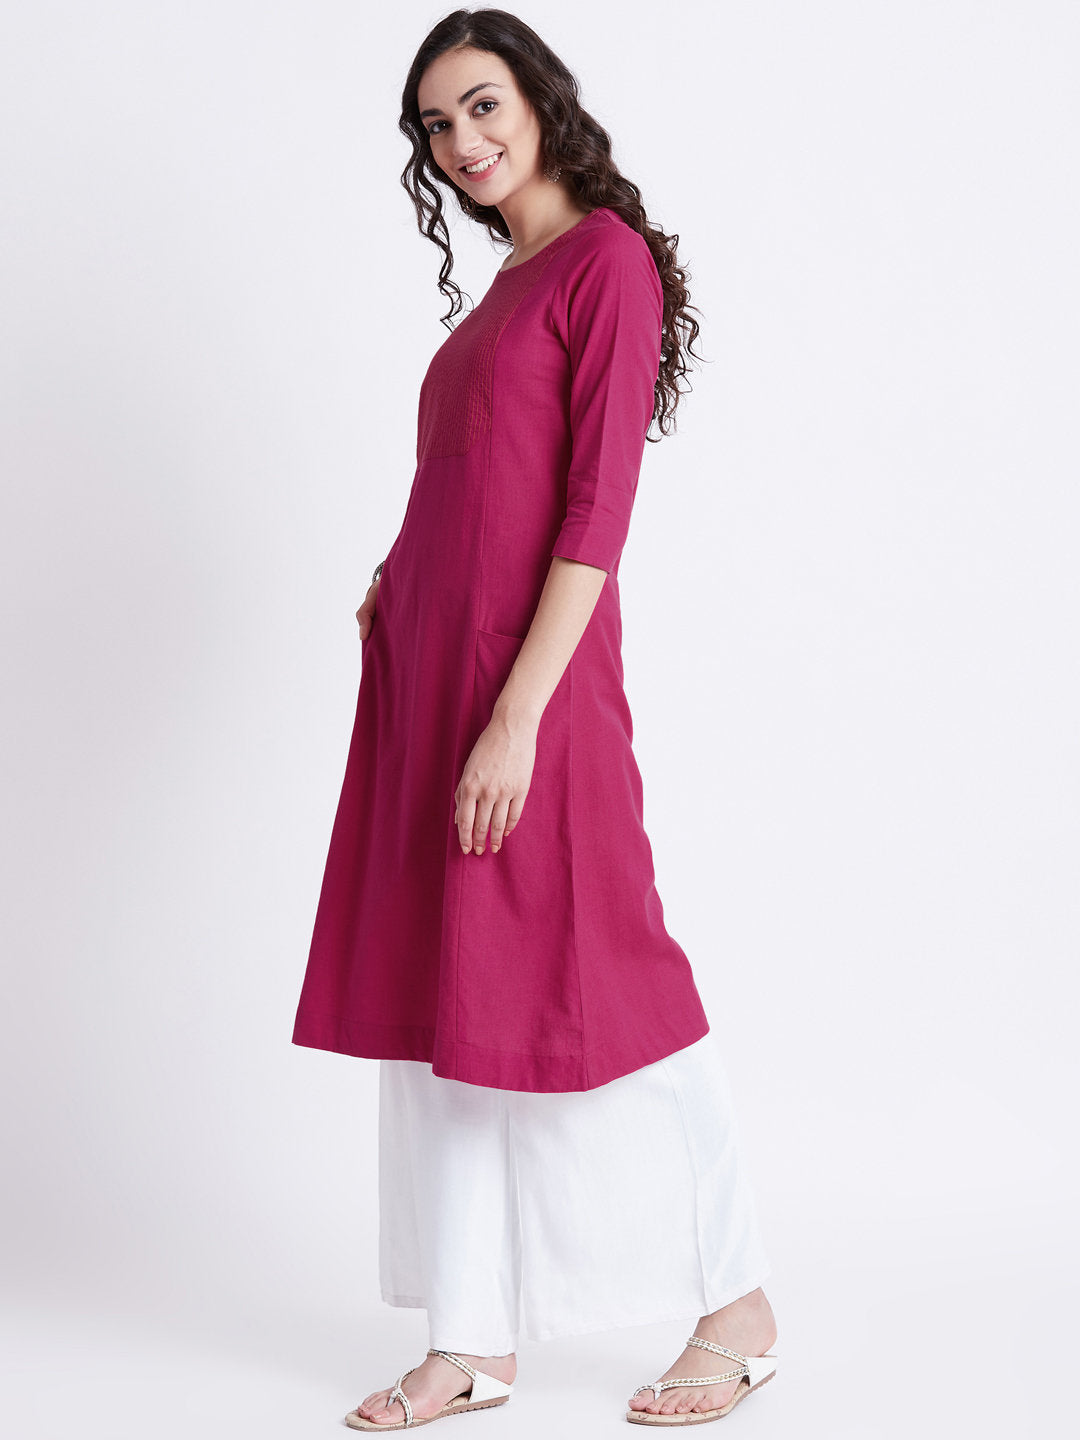 Indian ethnic long kurta with pockets in hot pink colour with embroidery detailing on yoke